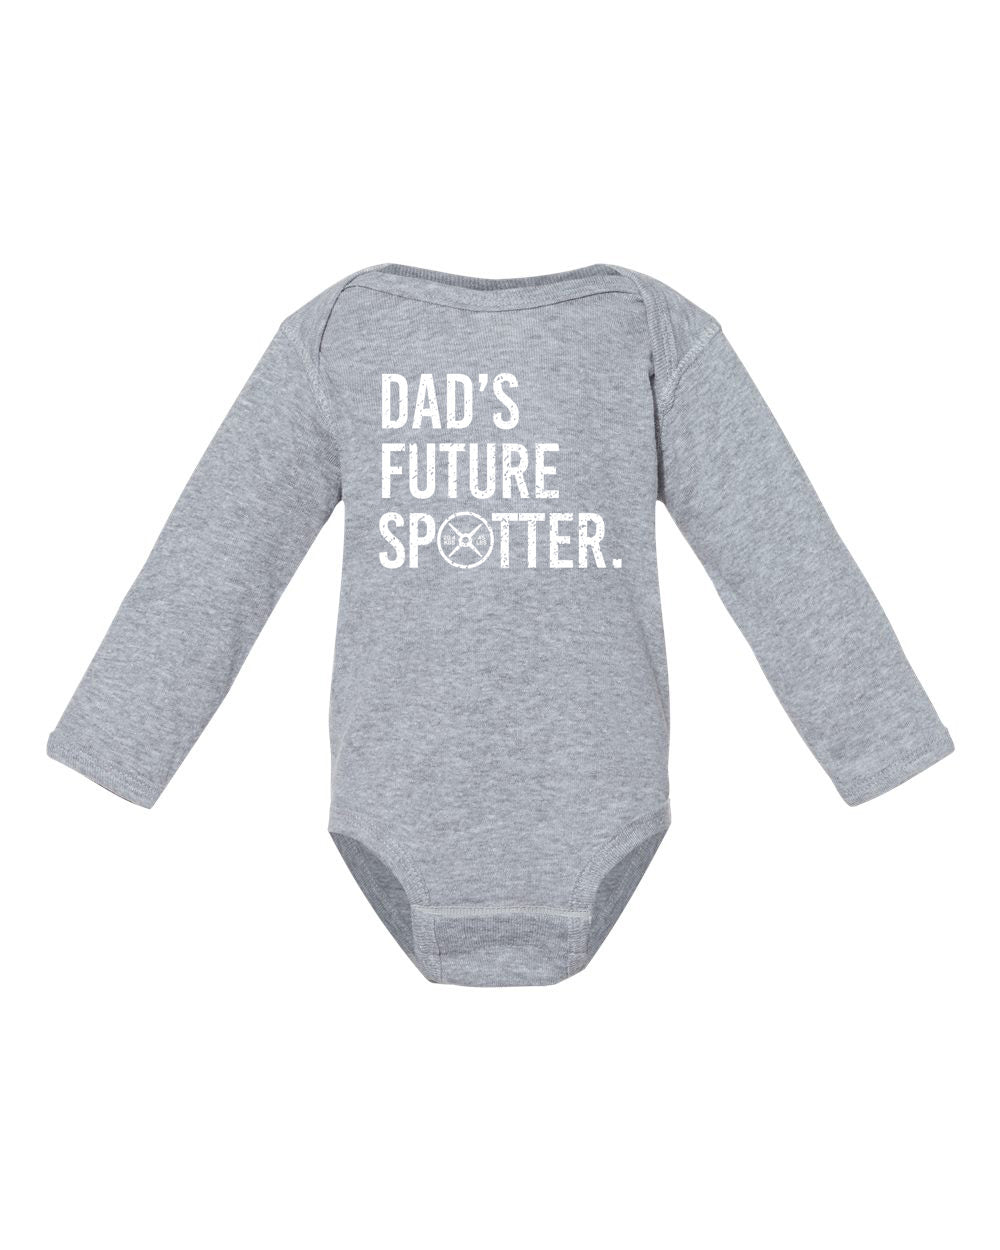 Dads Future Spotter LONG Sleeve Onesie